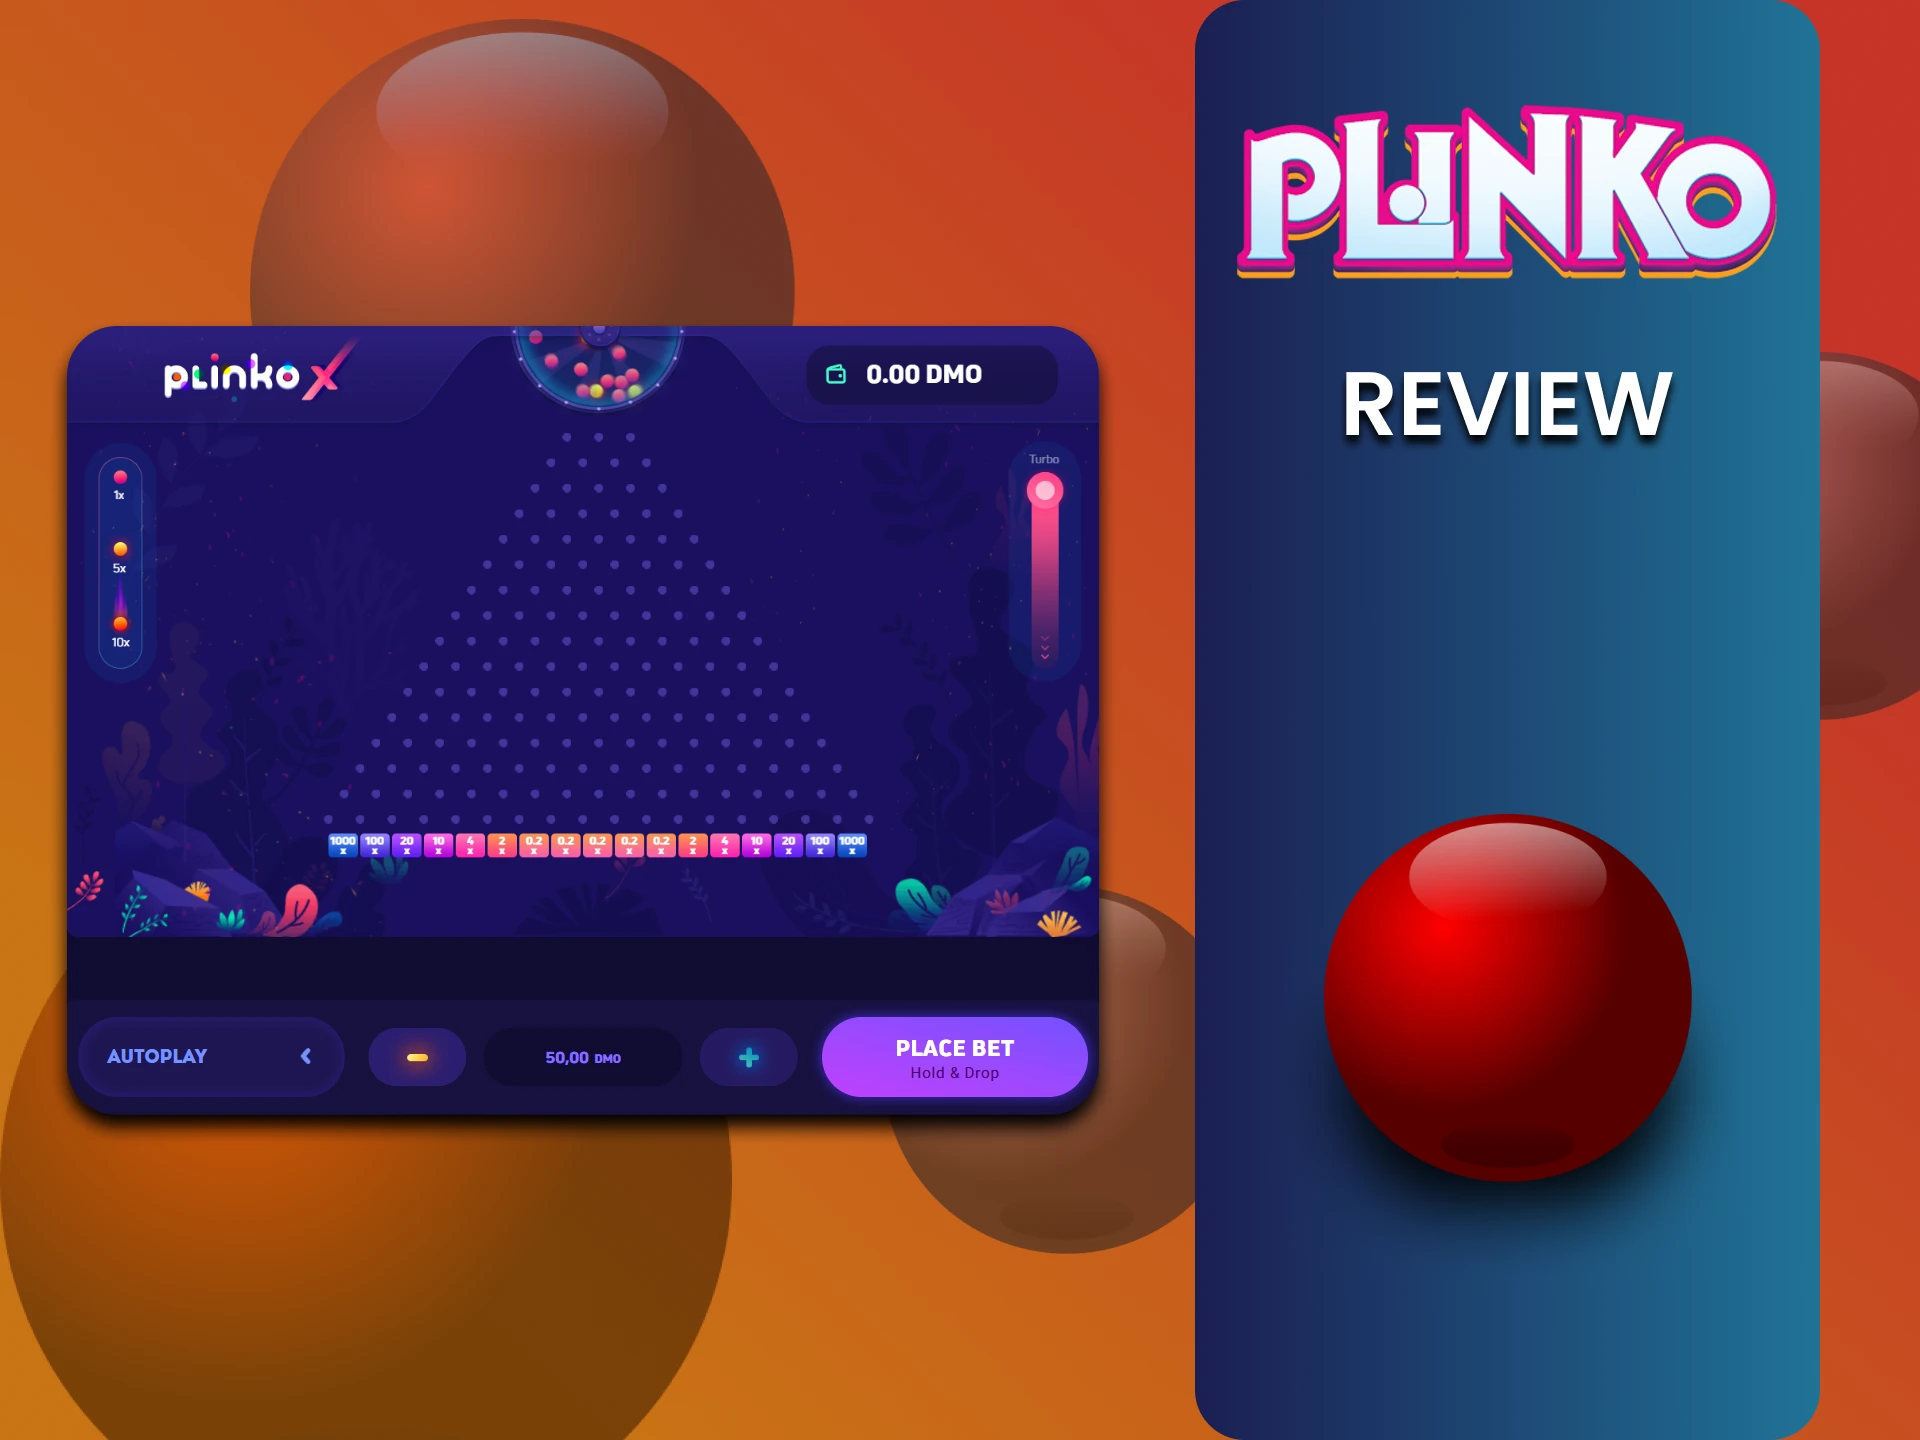 Find out all about the demo version of the Plinko game.